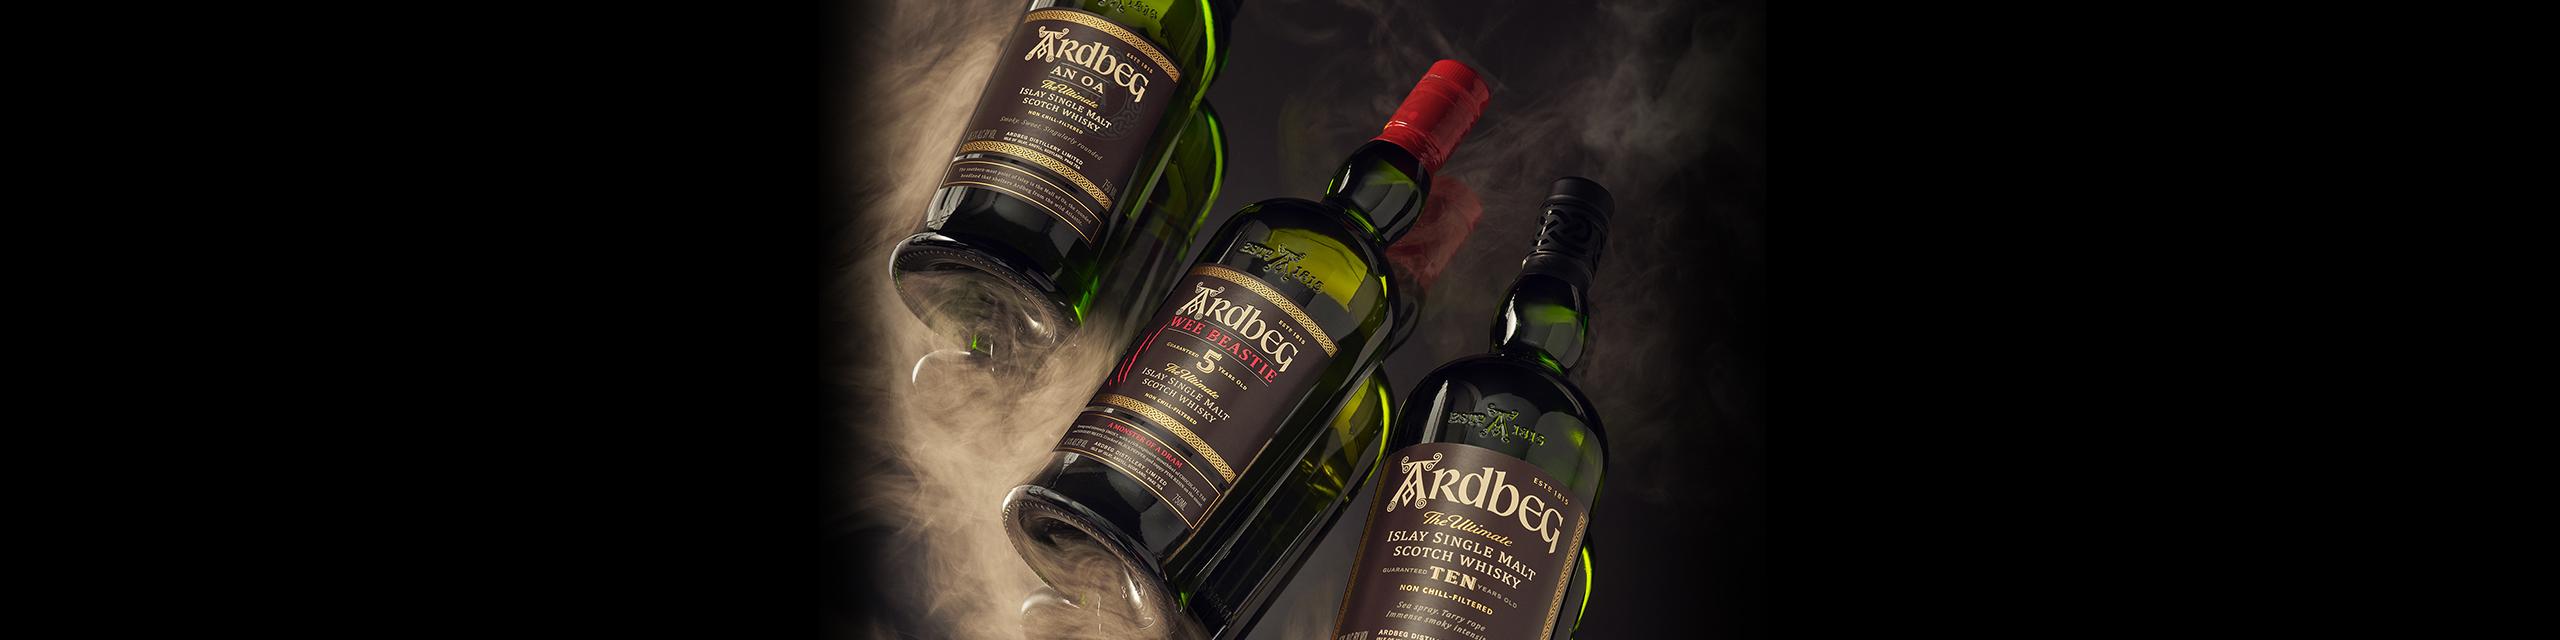 The Ardbeg distillery has been producing whisky on the remote, windswpet Scottish island of Islay for more than two centuries. Here, soft water and extensive peat bogs provide for the creation of a smoky single-malt whisky that has achieved cult status among connoisseurs.